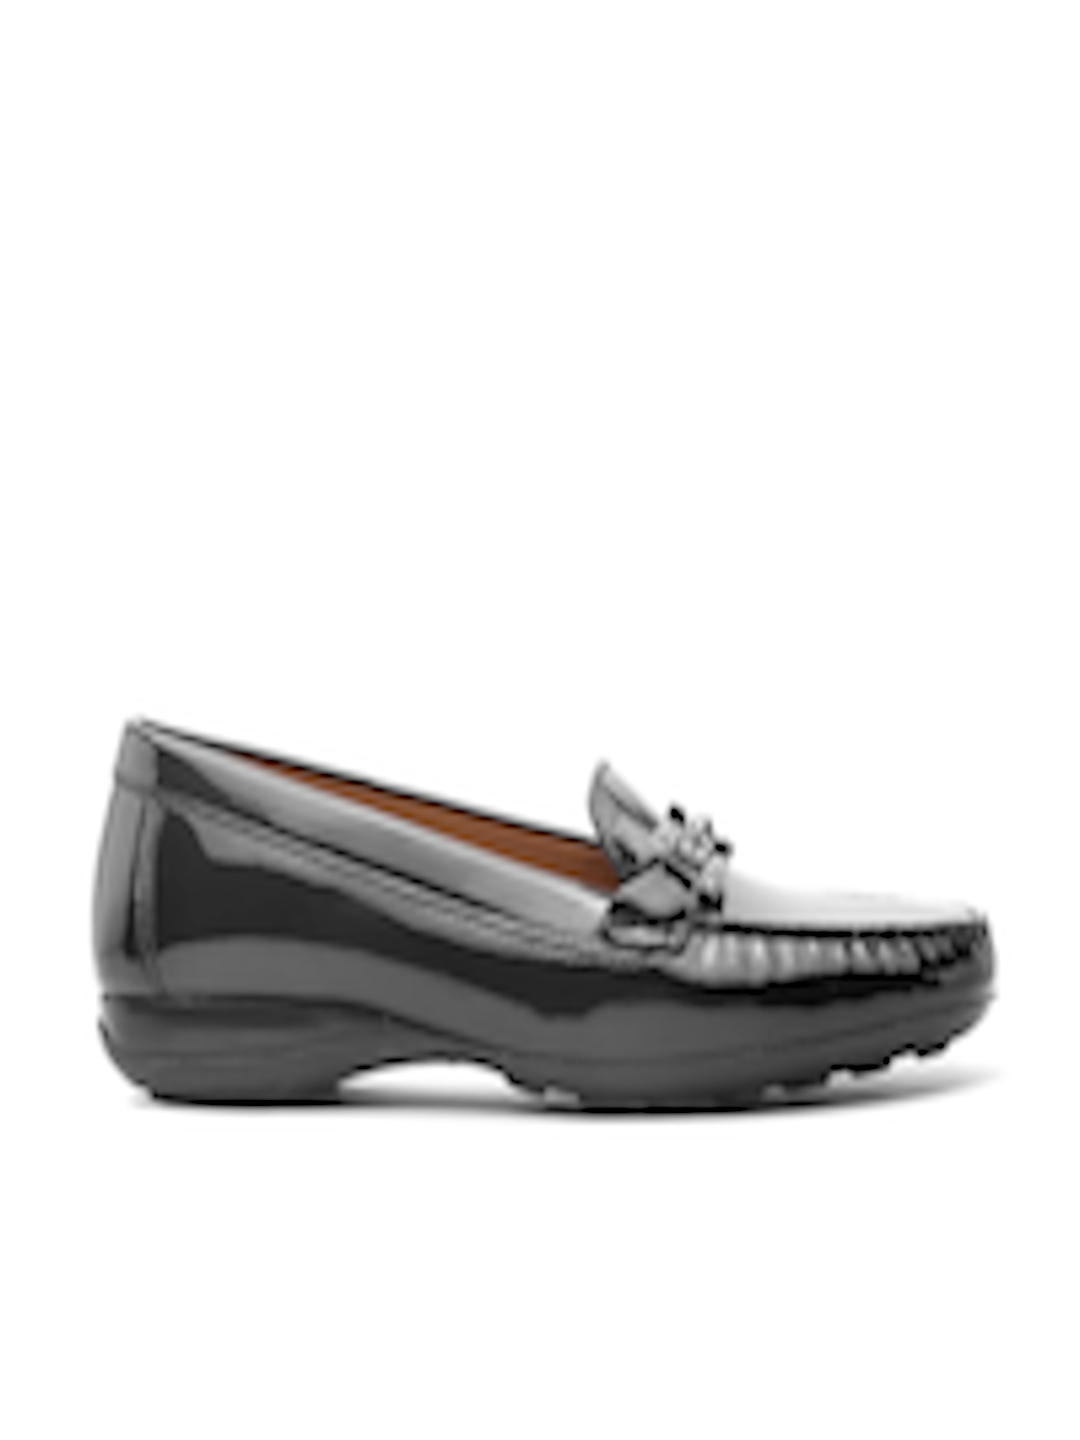 Buy Geox Women Black Patent Leather Loafers - Casual Shoes for Women ...